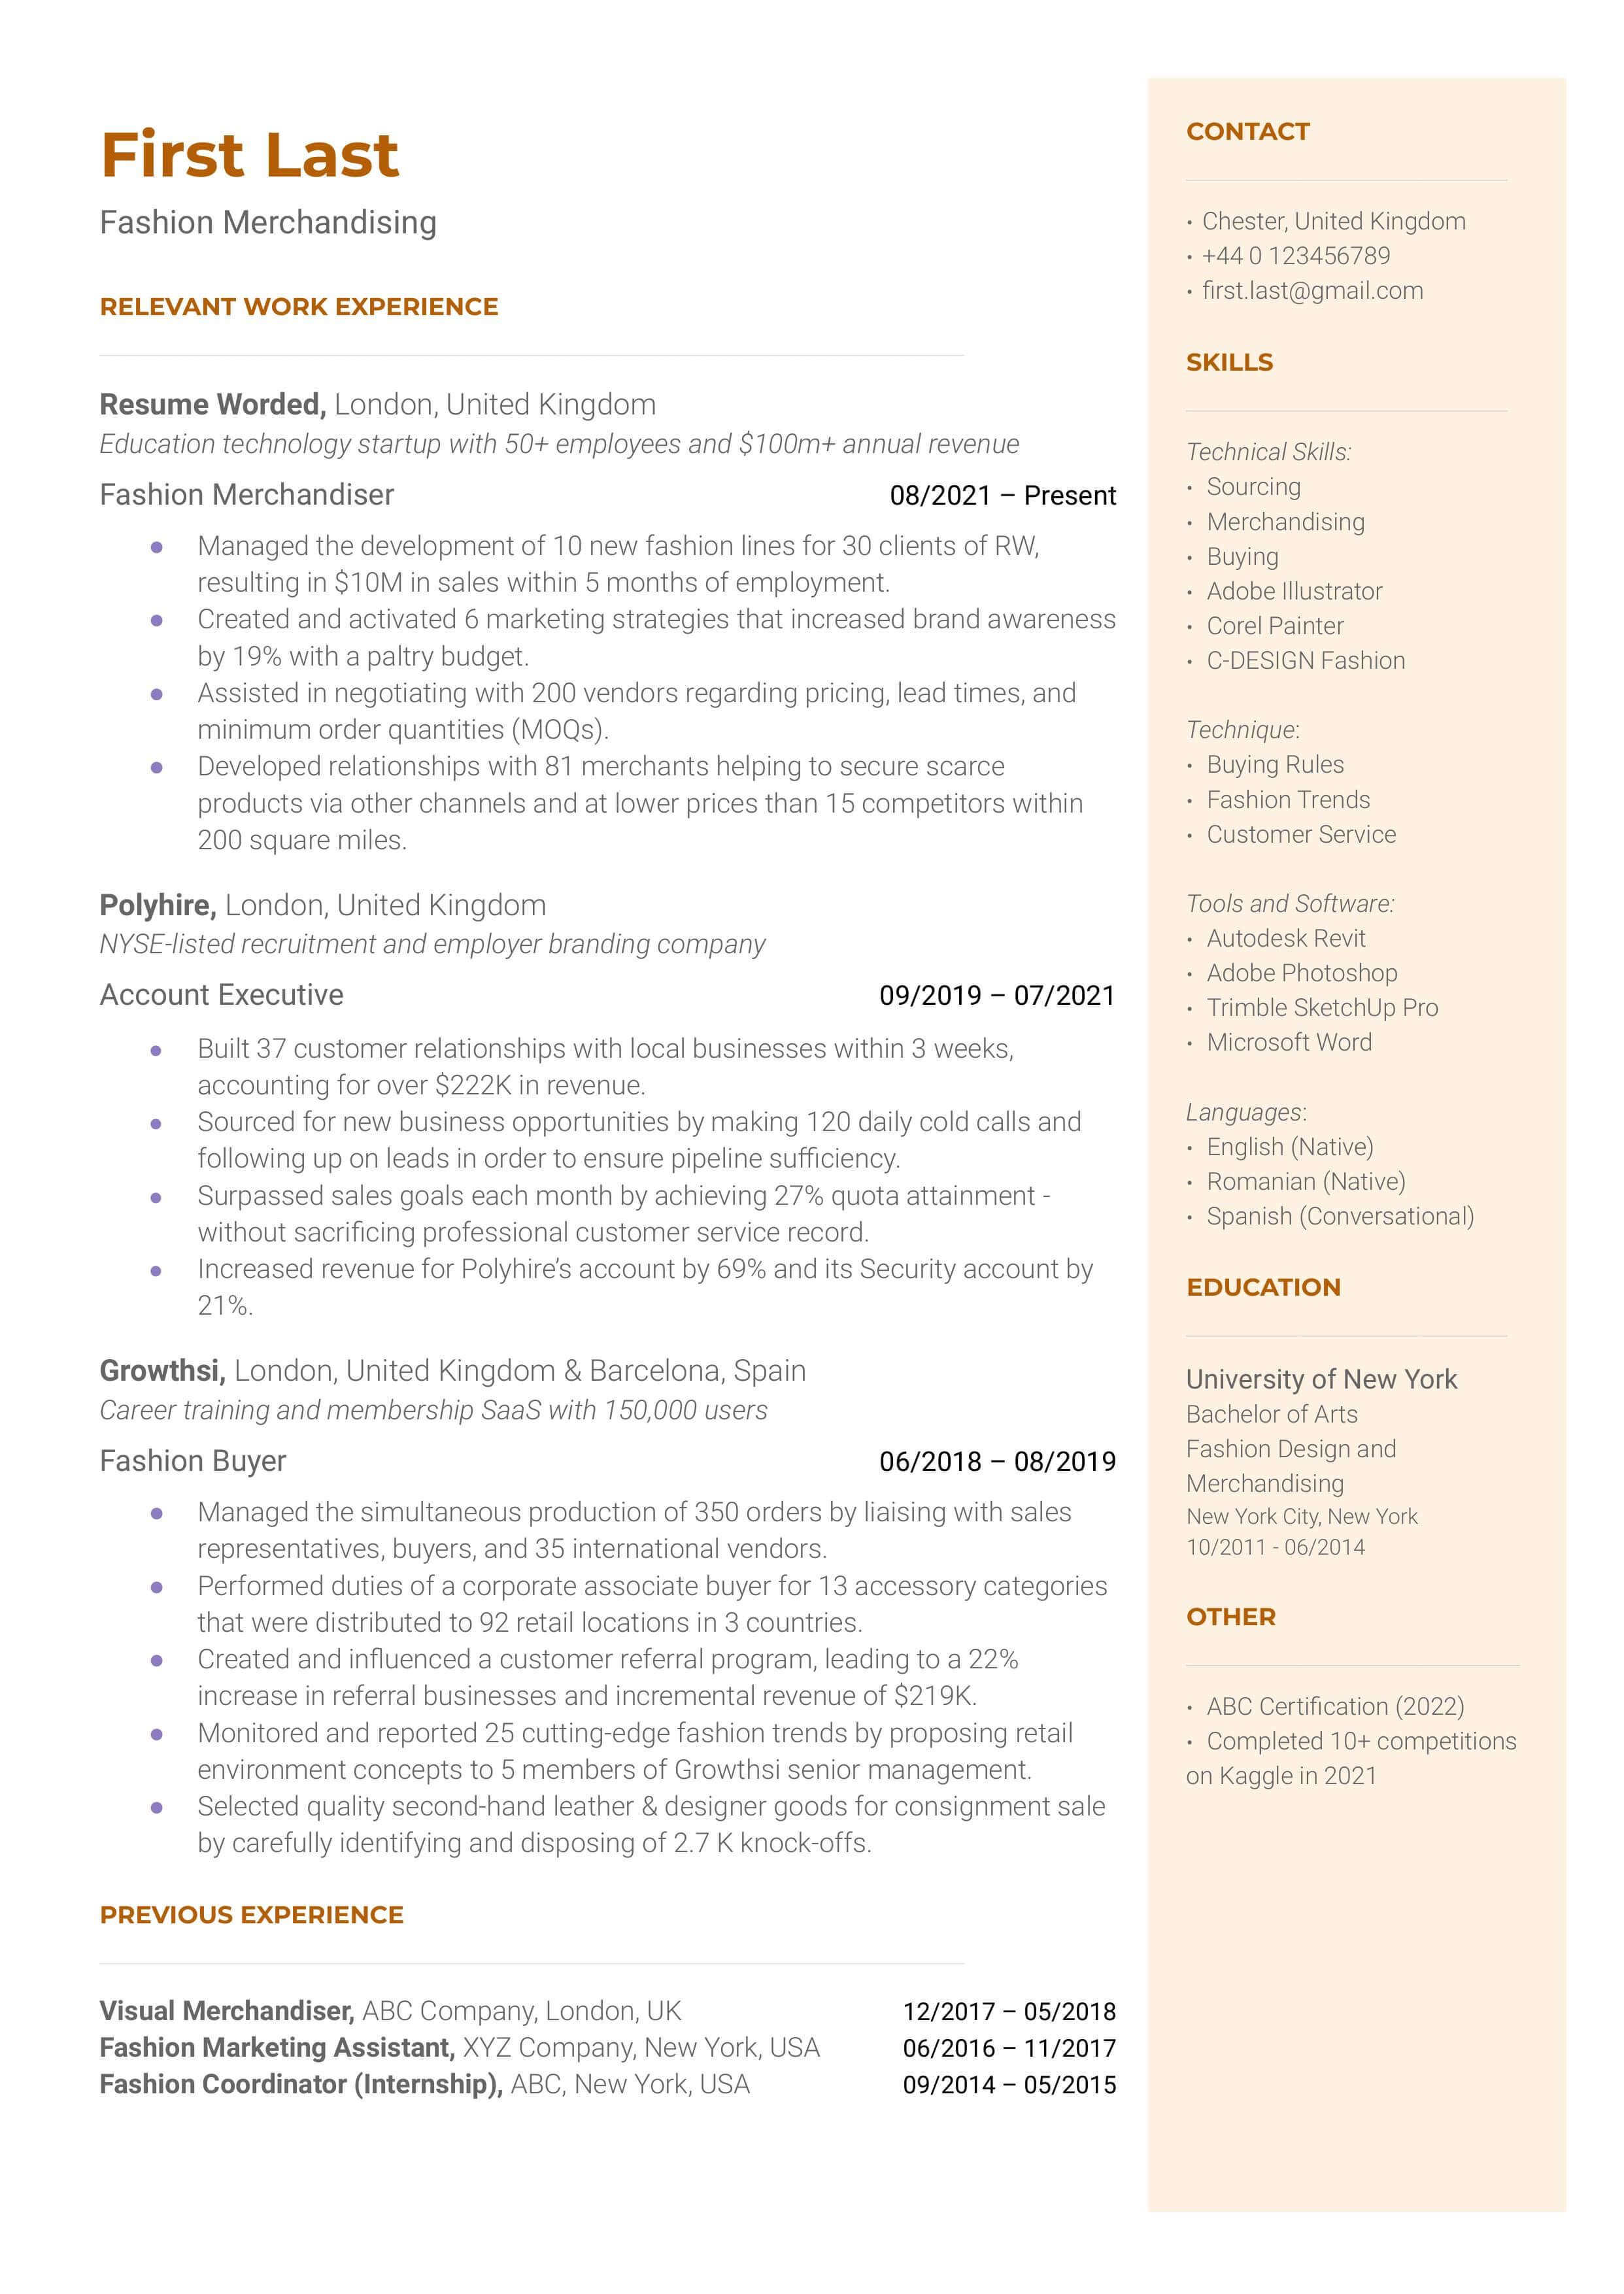 A fashion merchandising resume template that includes relevant work experience followed by contact info and skills